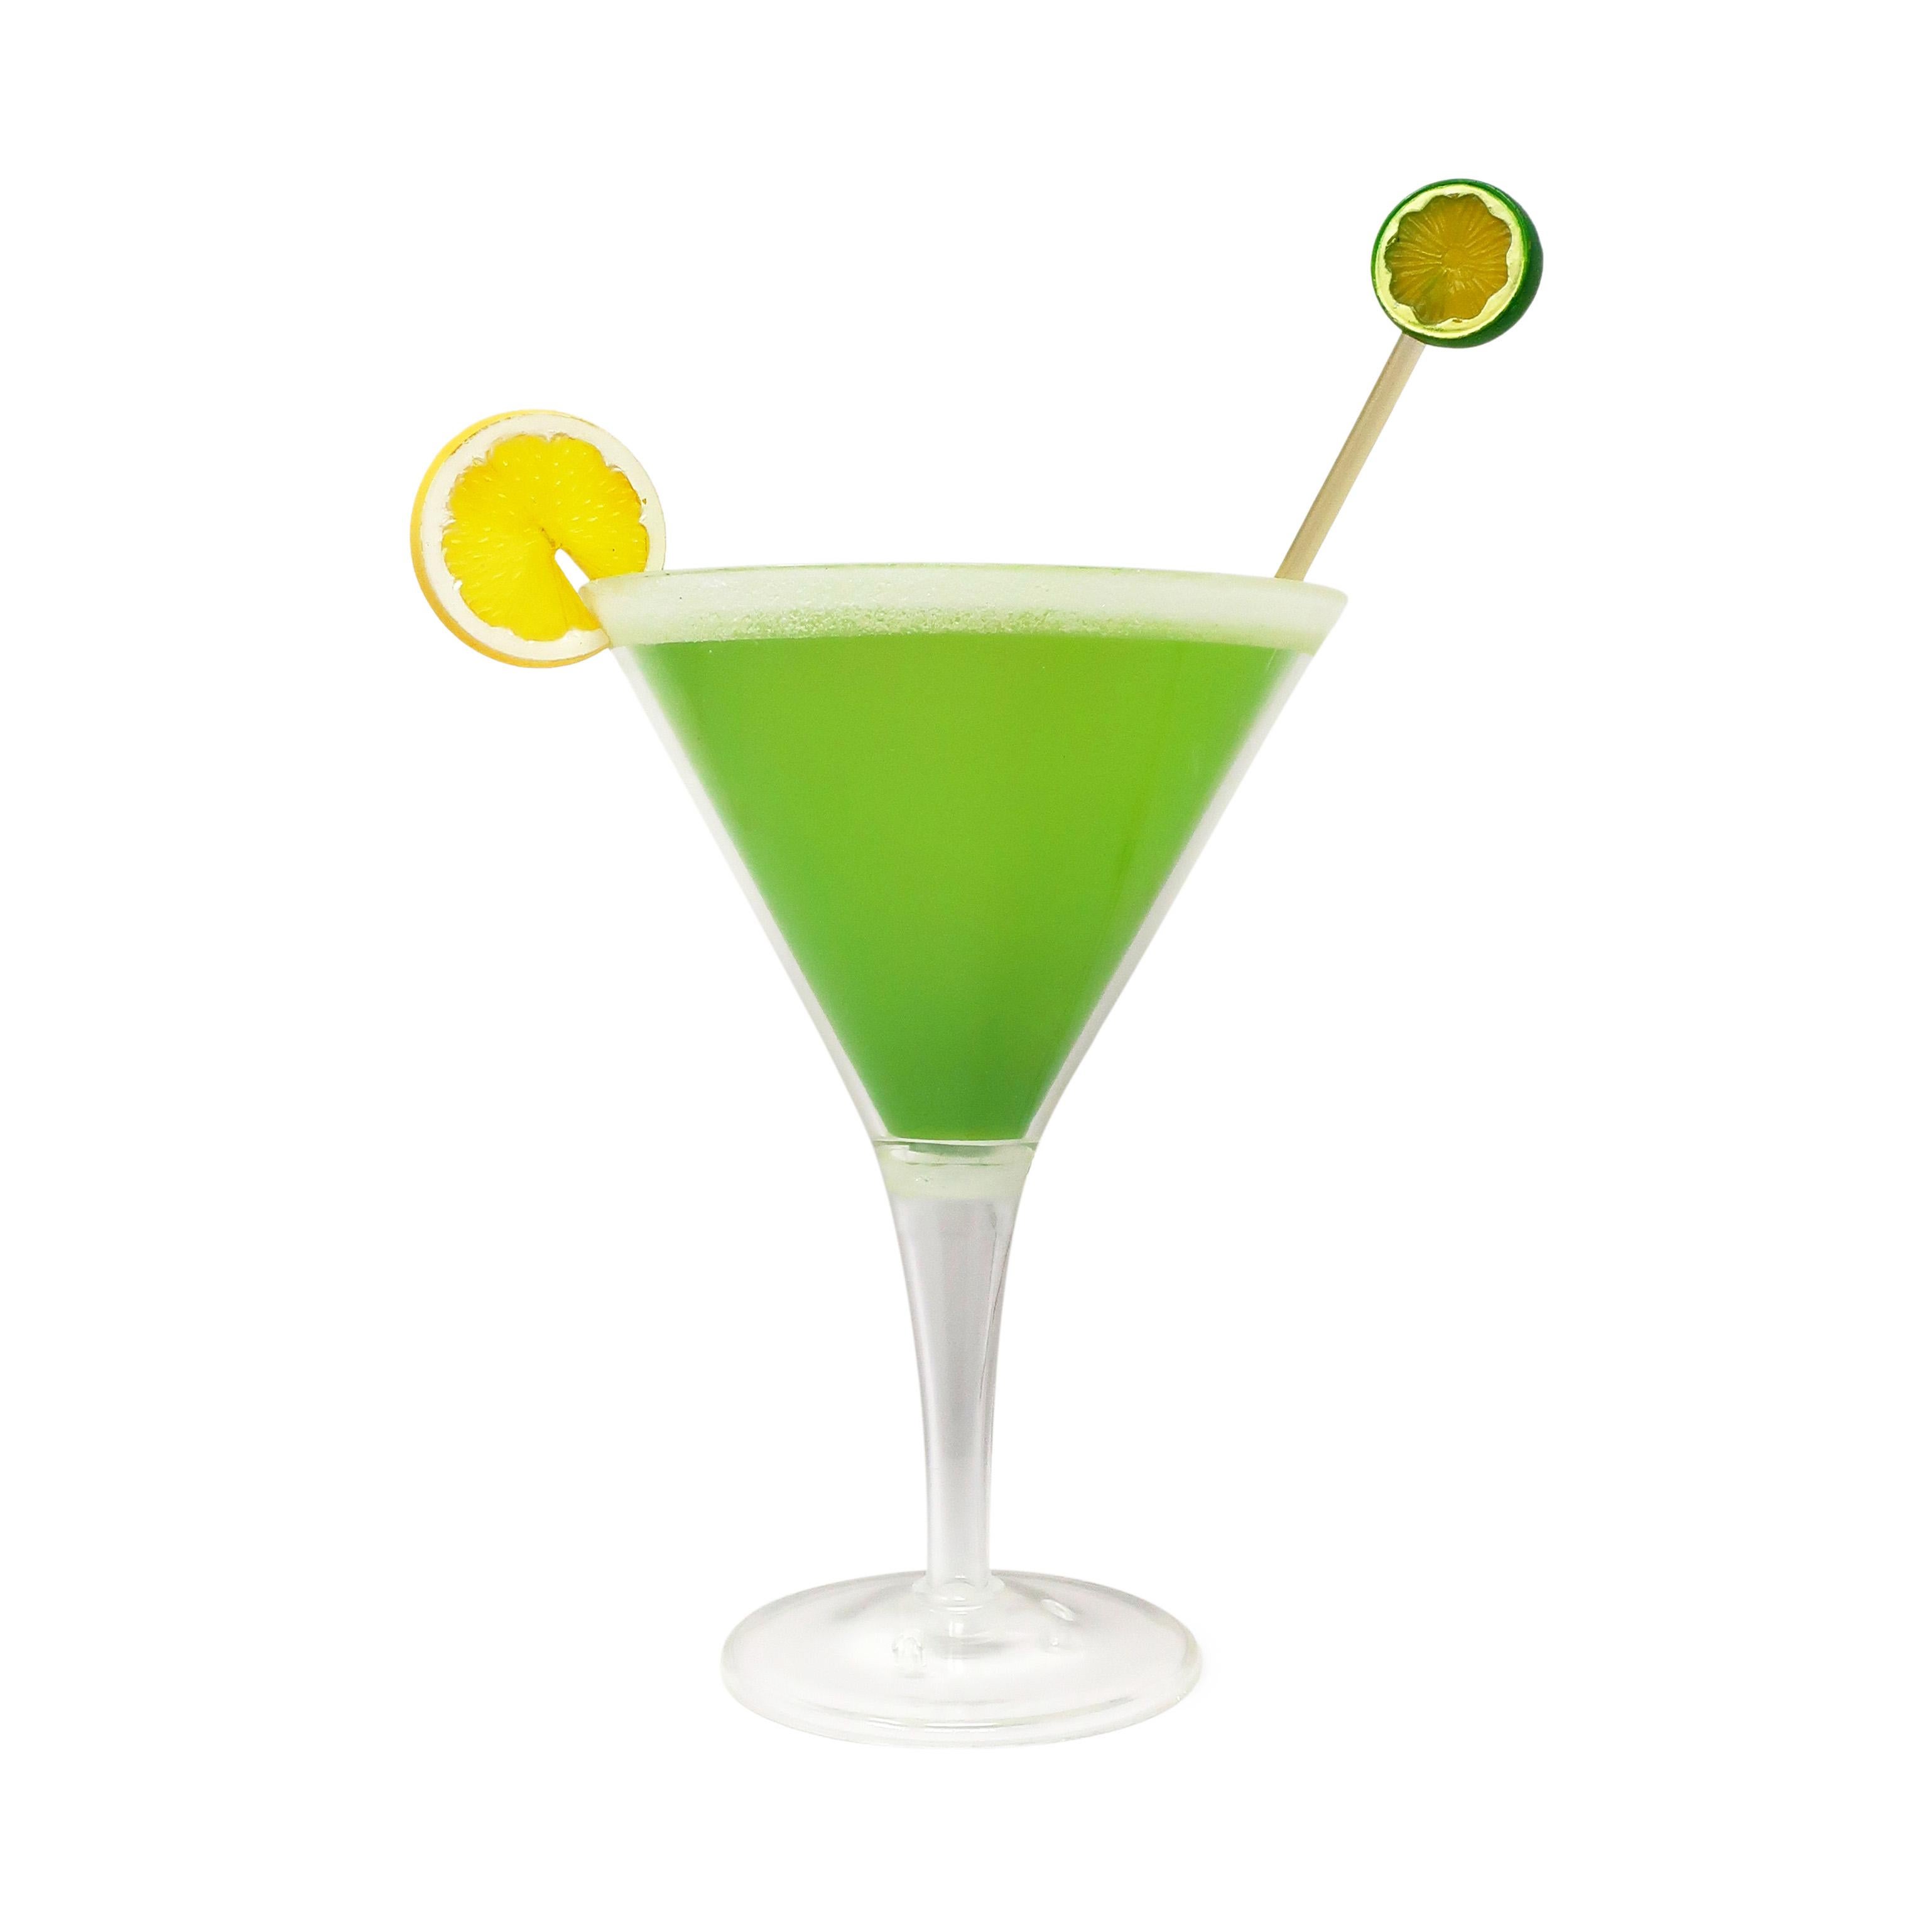 A hard-to-find postmodern cocktail lamp with a clear lucite martini shaped glass, green shading to look like a full margarita, textured rim as though it has been dipped in salt, and a stick with a slice of lime on the end. Great for lovers of pop